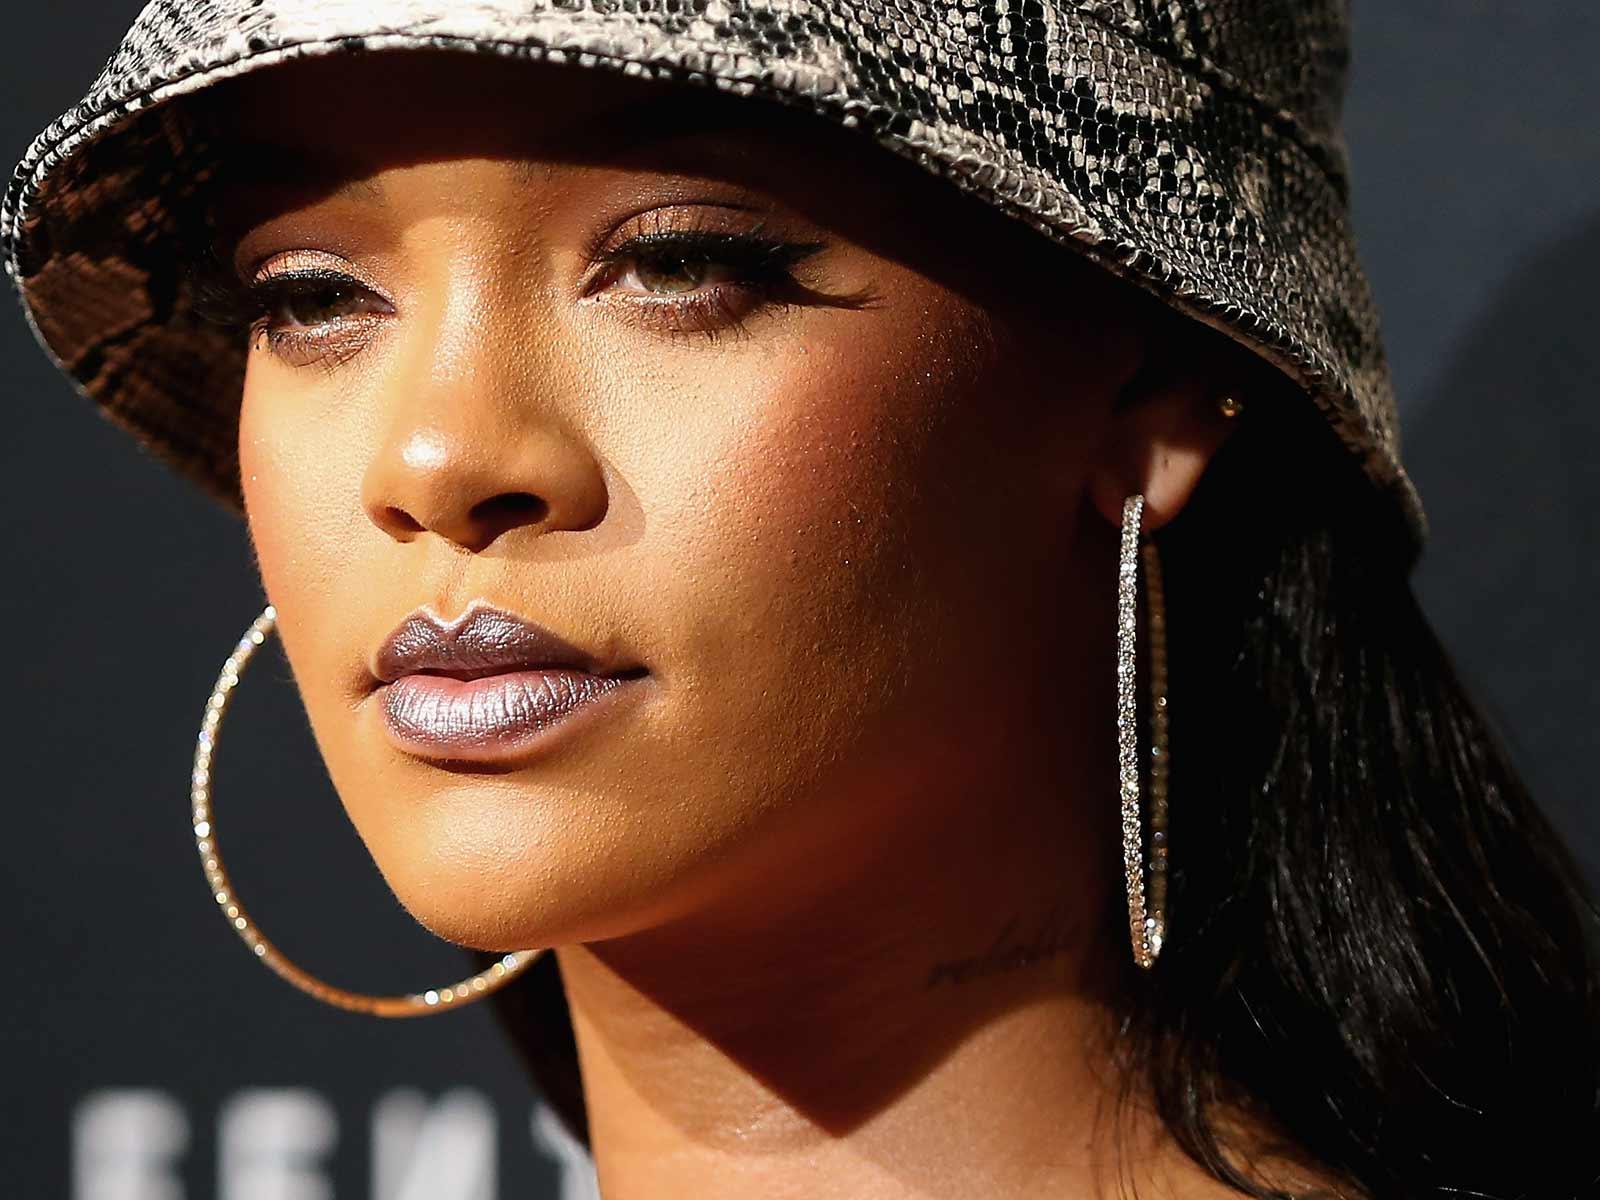 Rihanna Sued for Allegedly Giving a Clothing Company the Middle Finger Over ‘FU’ Logo